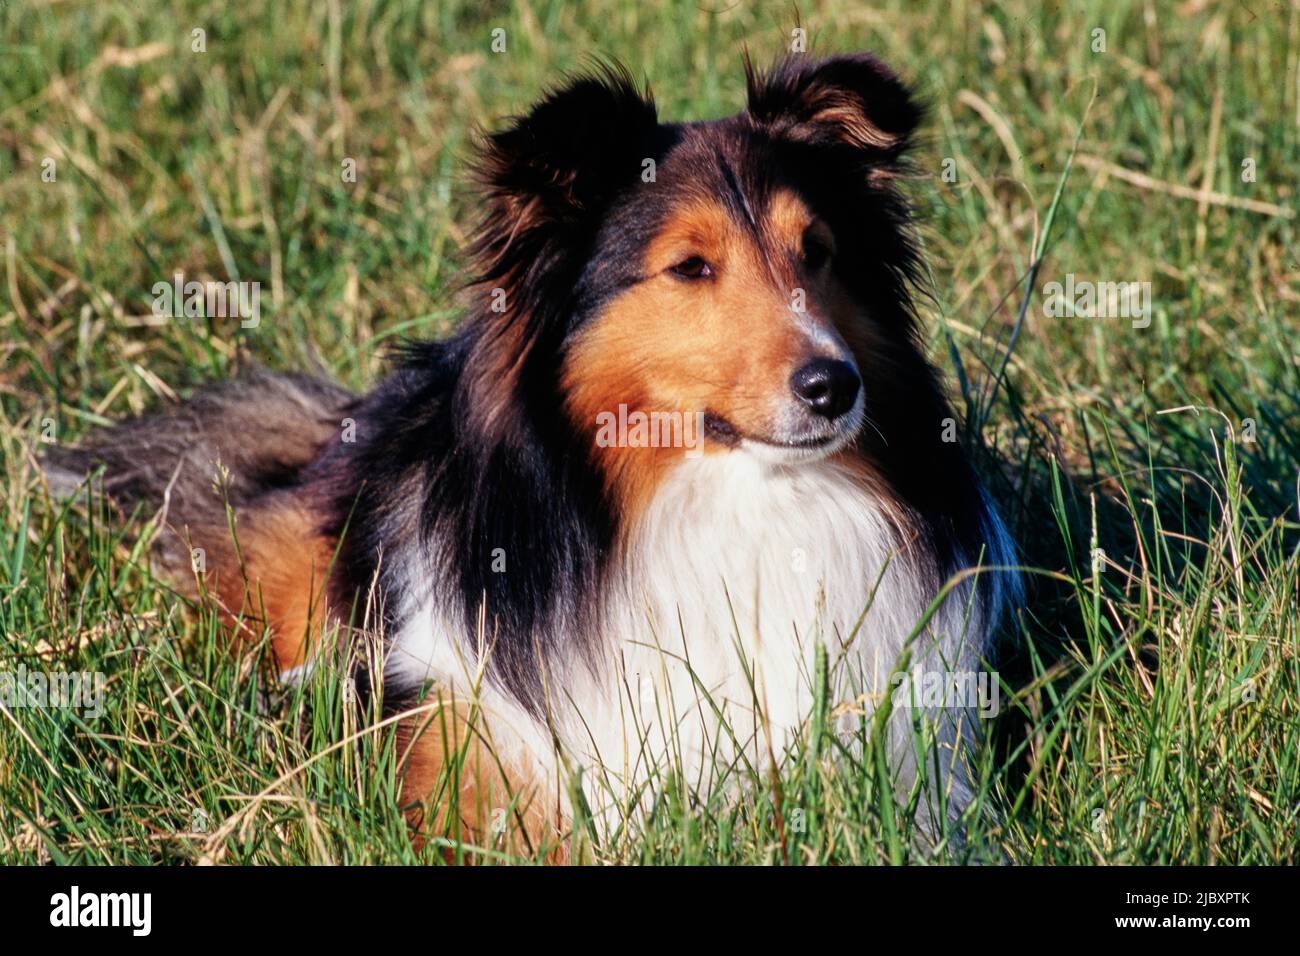 A sheltie dog laying in a grassy field Stock Photo